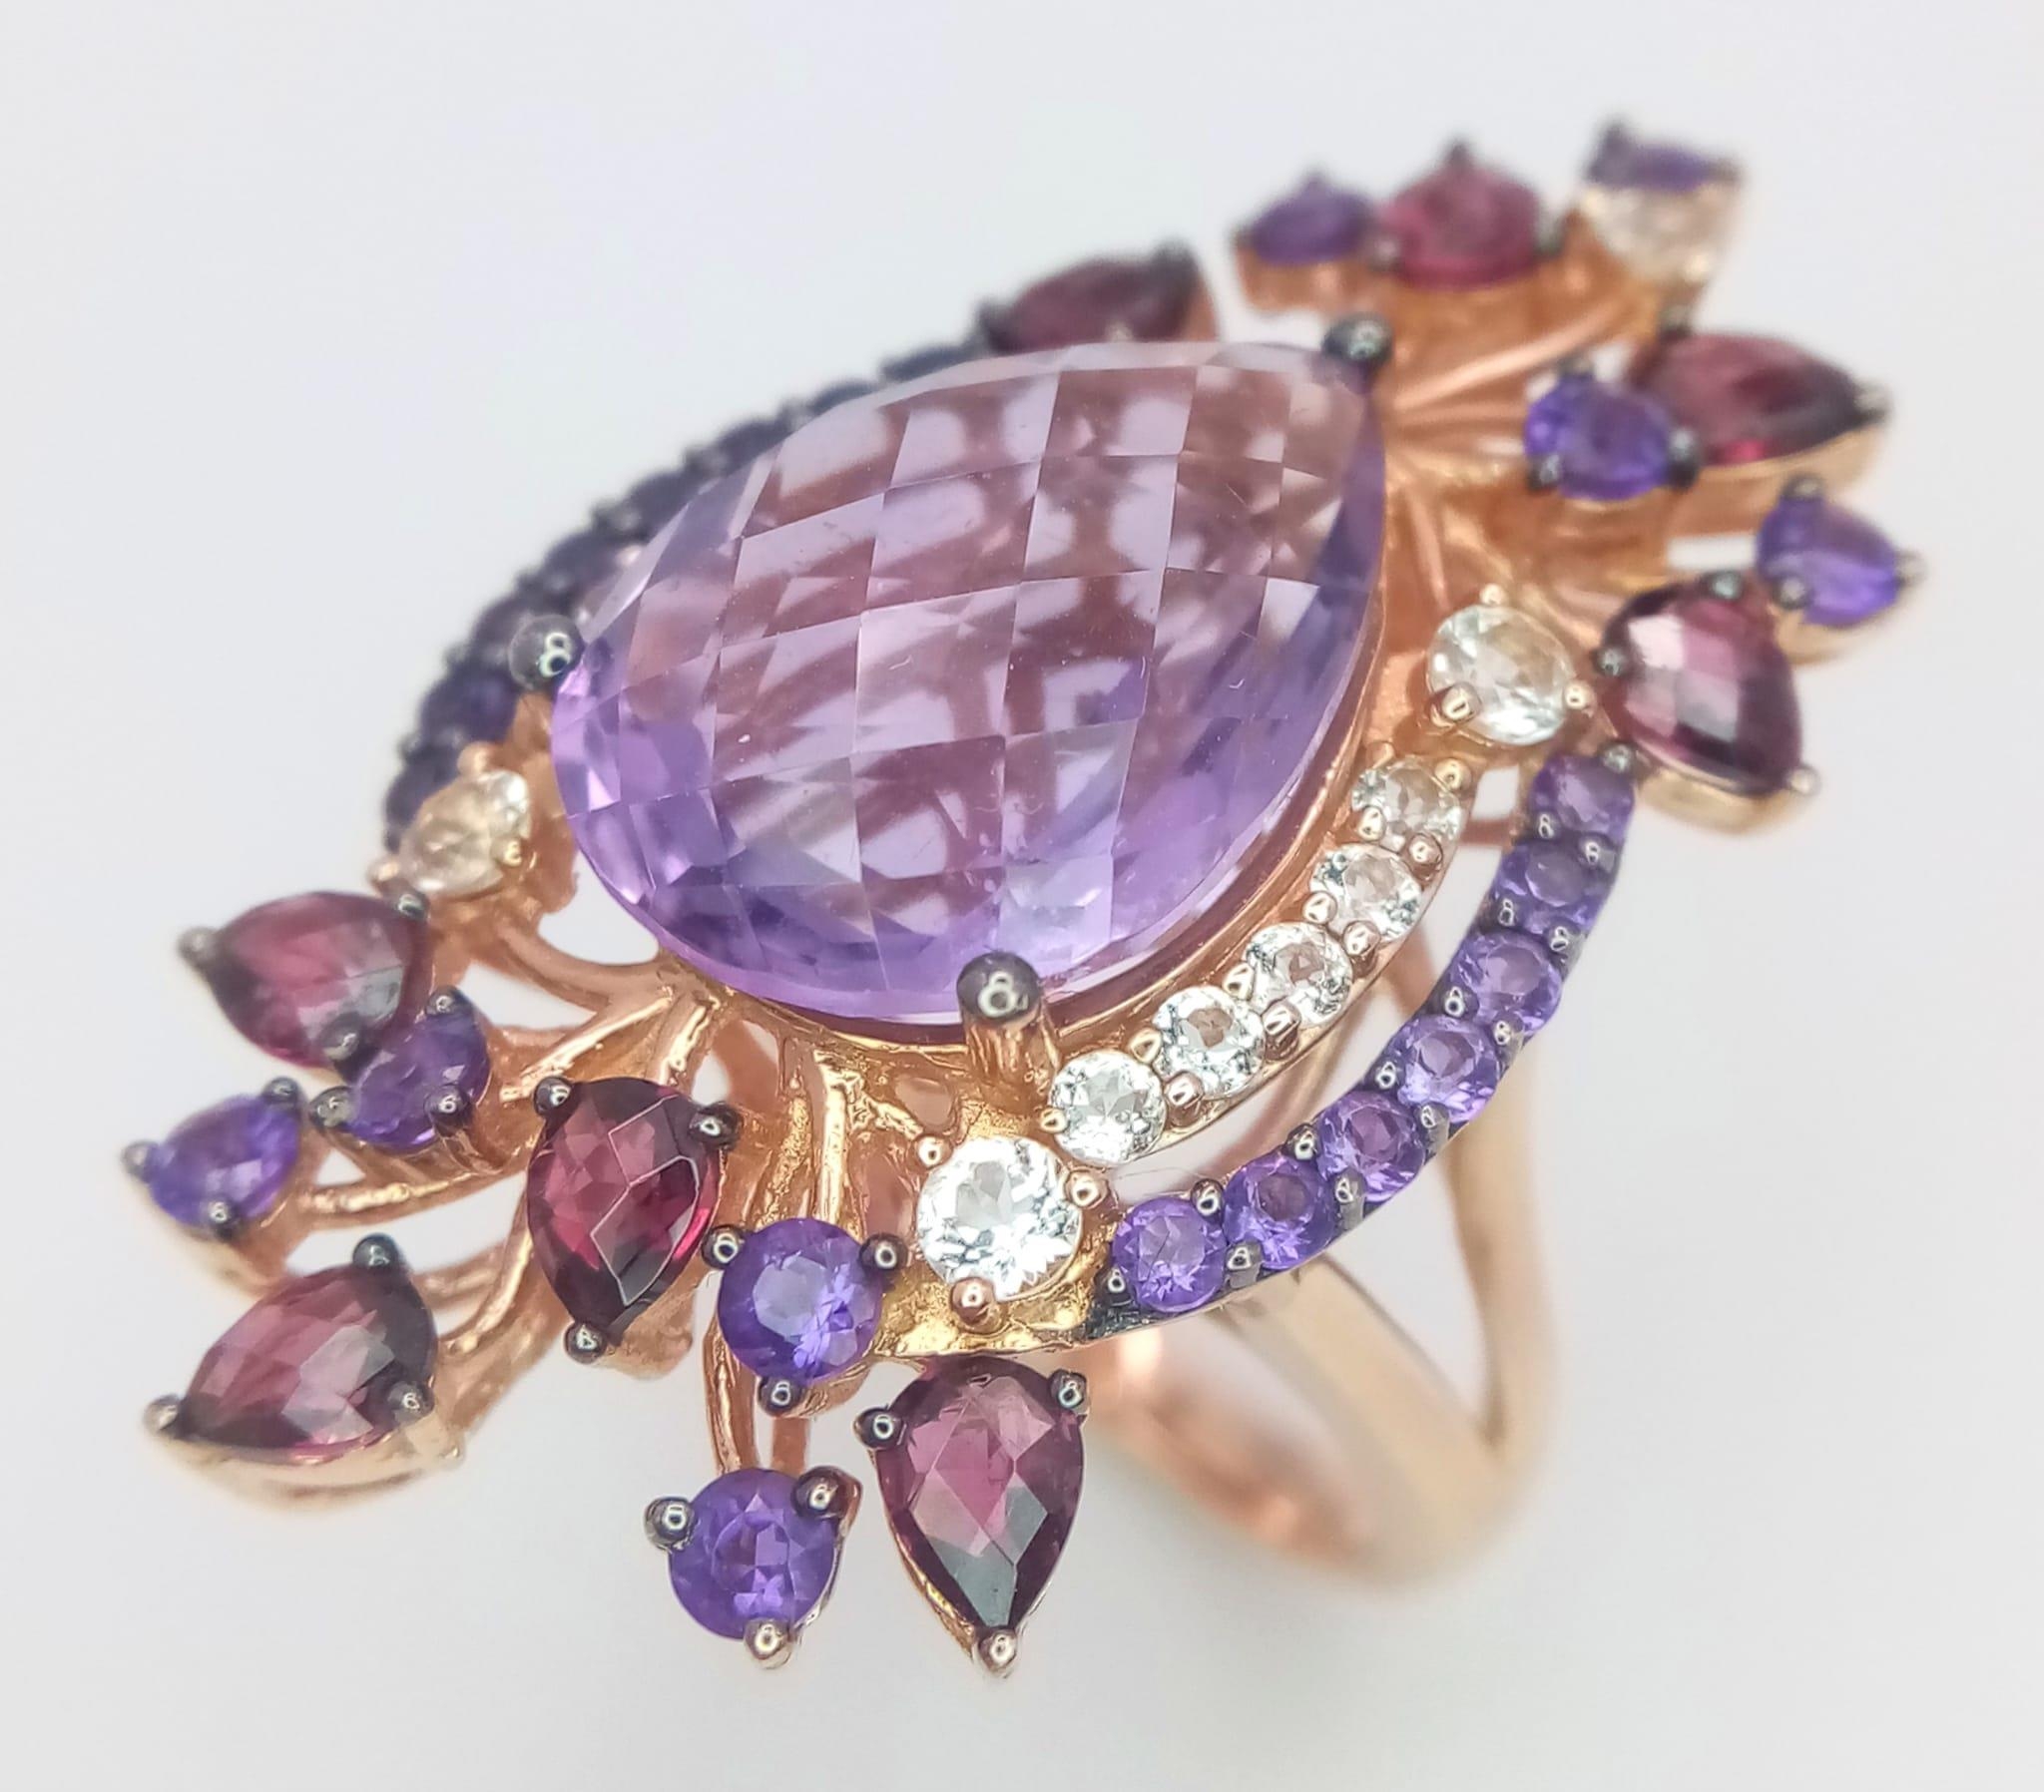 A stunning LE VIAN design, 14 K rose gold ring and earrings set with large pear shaped amethysts and - Image 9 of 11